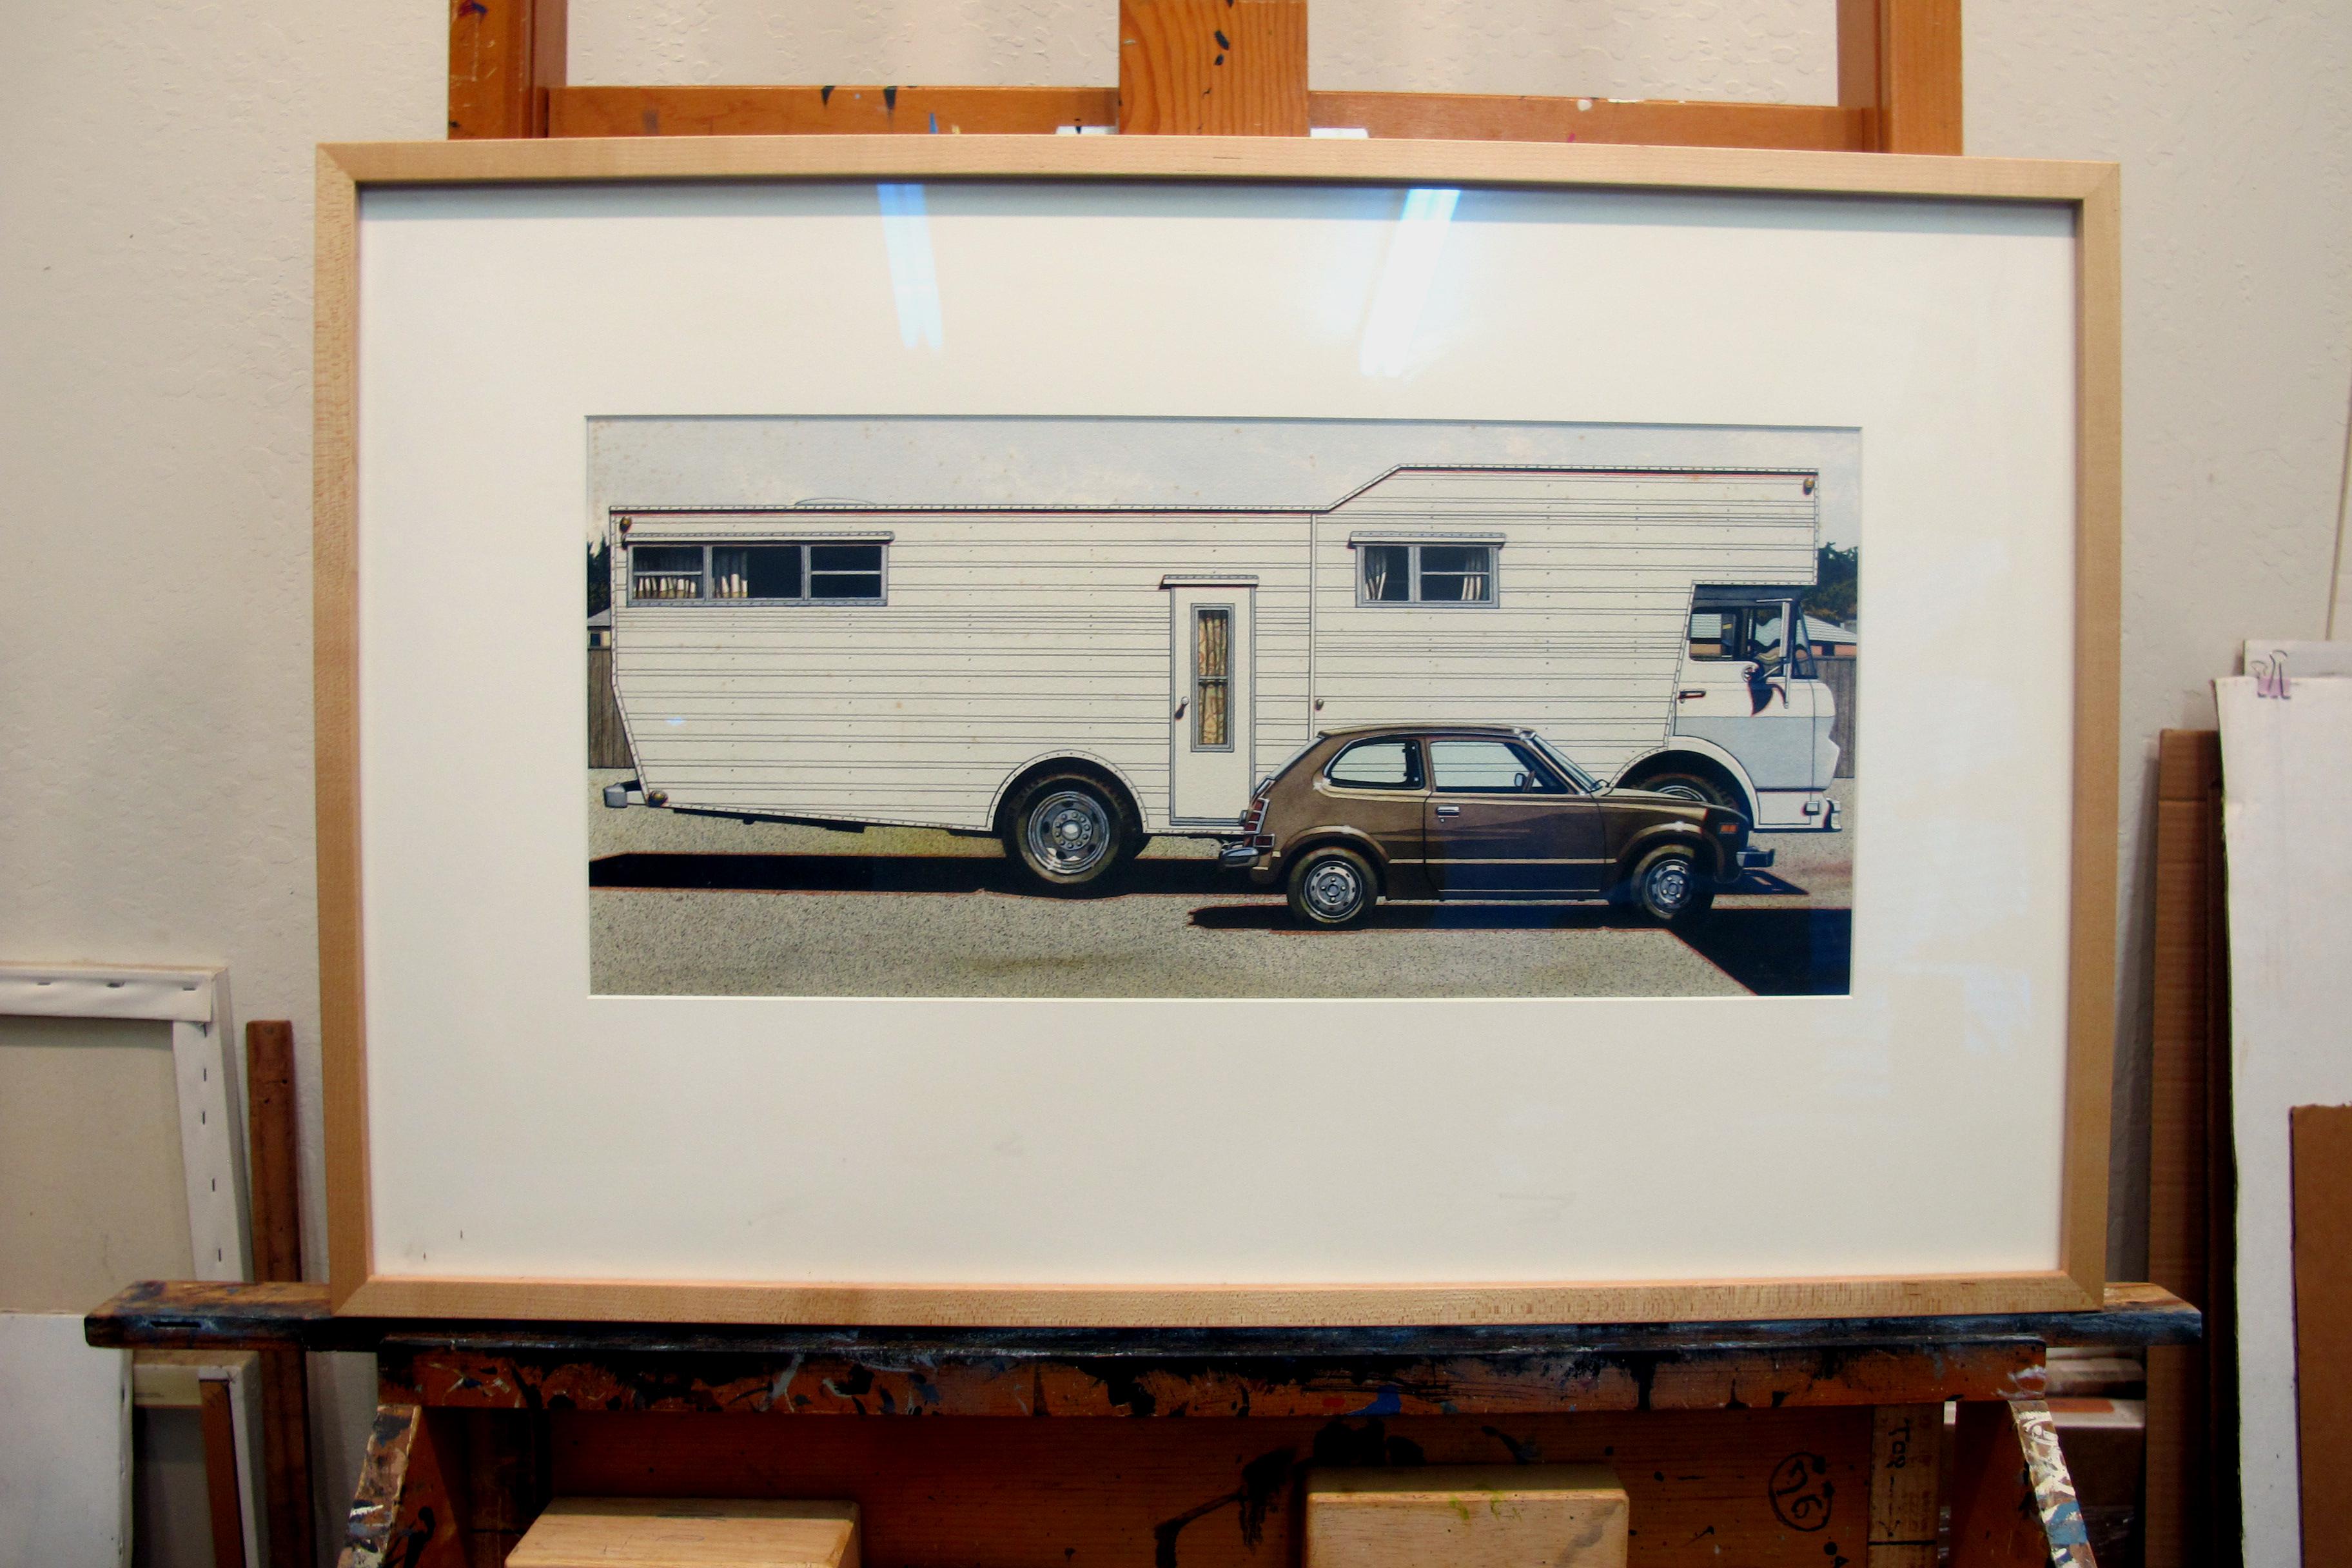 Mobile Home with Honda - original watercolor, 1974 - American Realist Art by James Torlakson